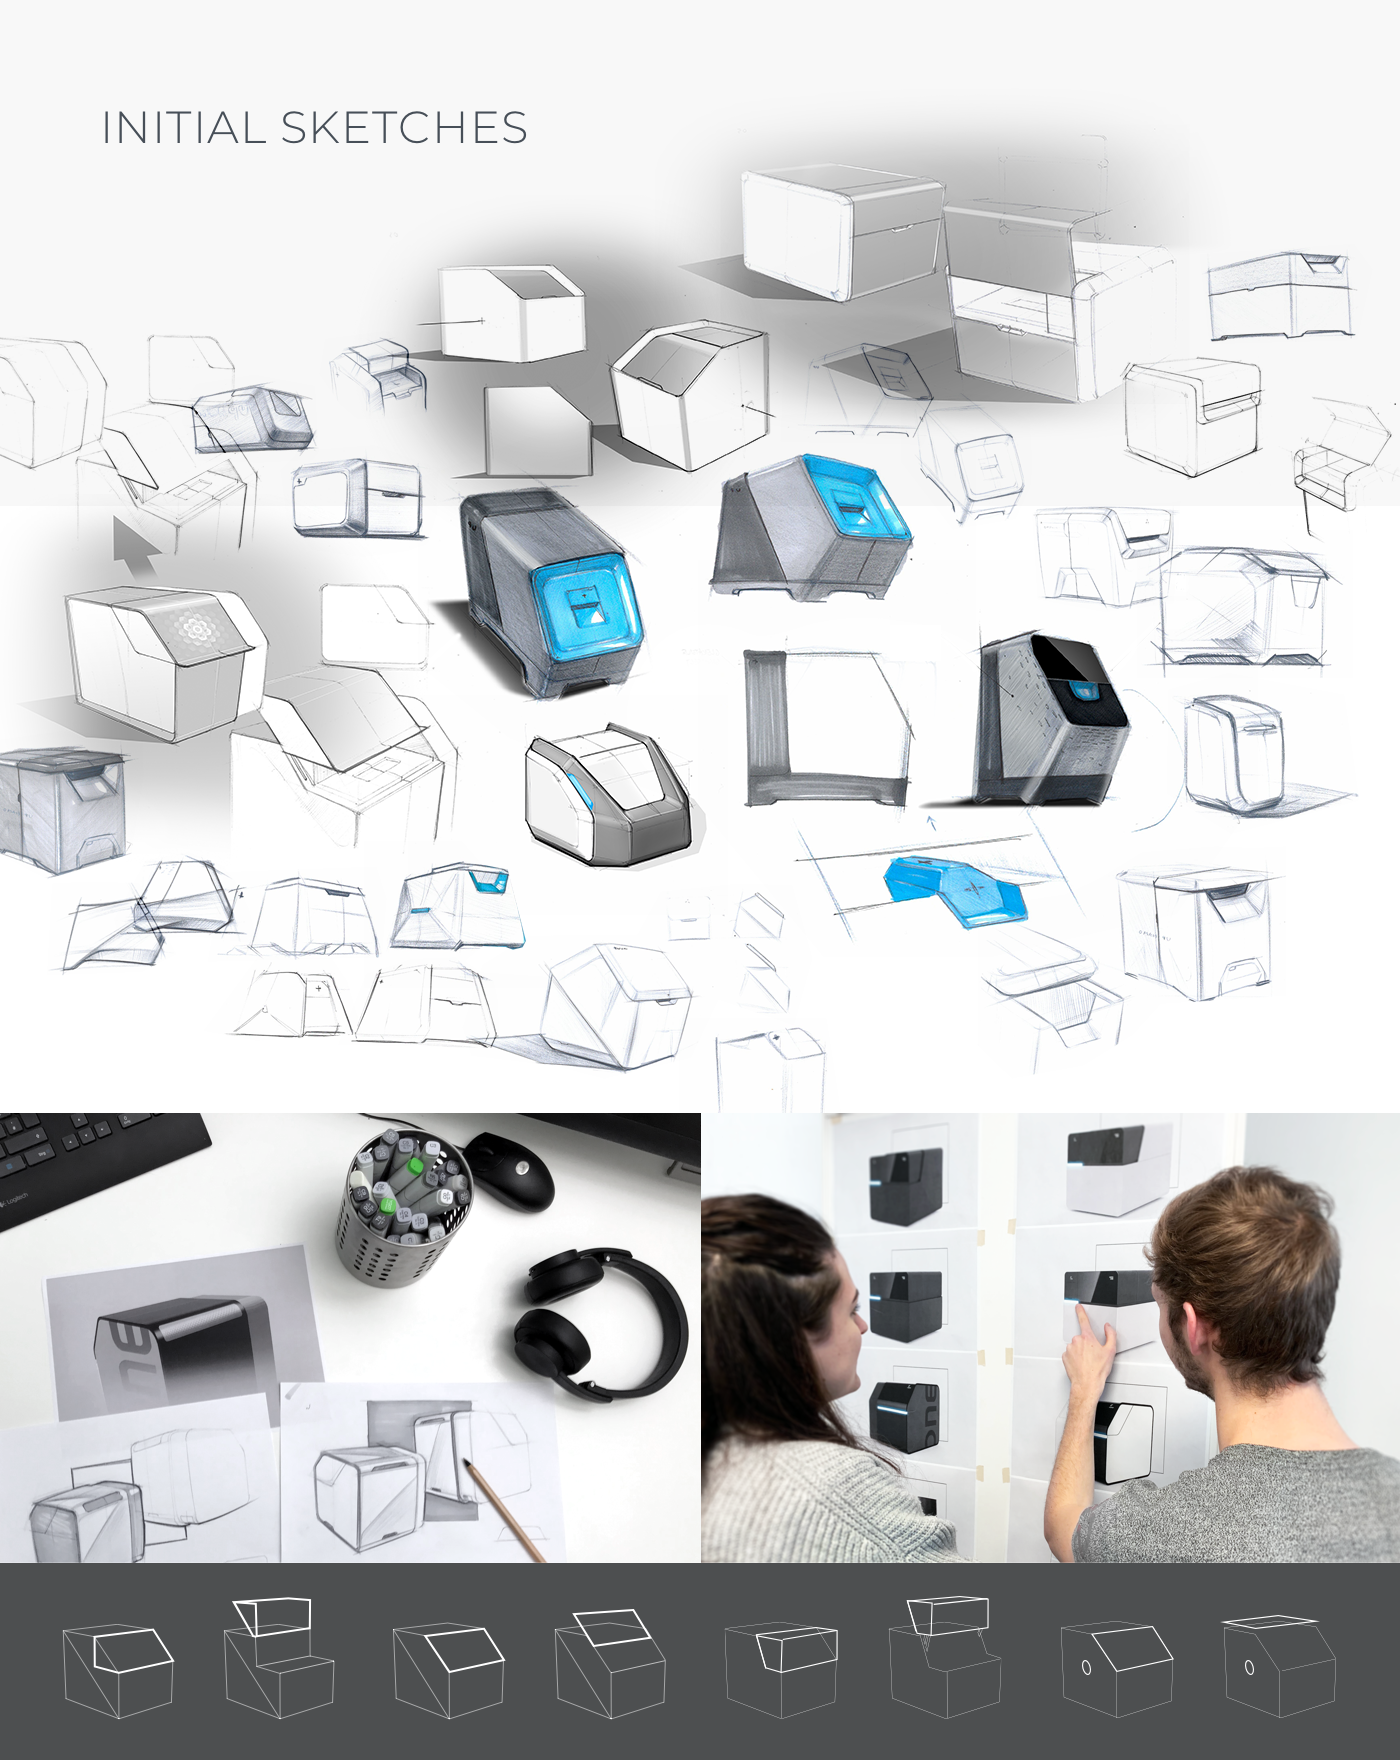 3D Printer Product Design Sketches for optimal usability | Product design Vienna